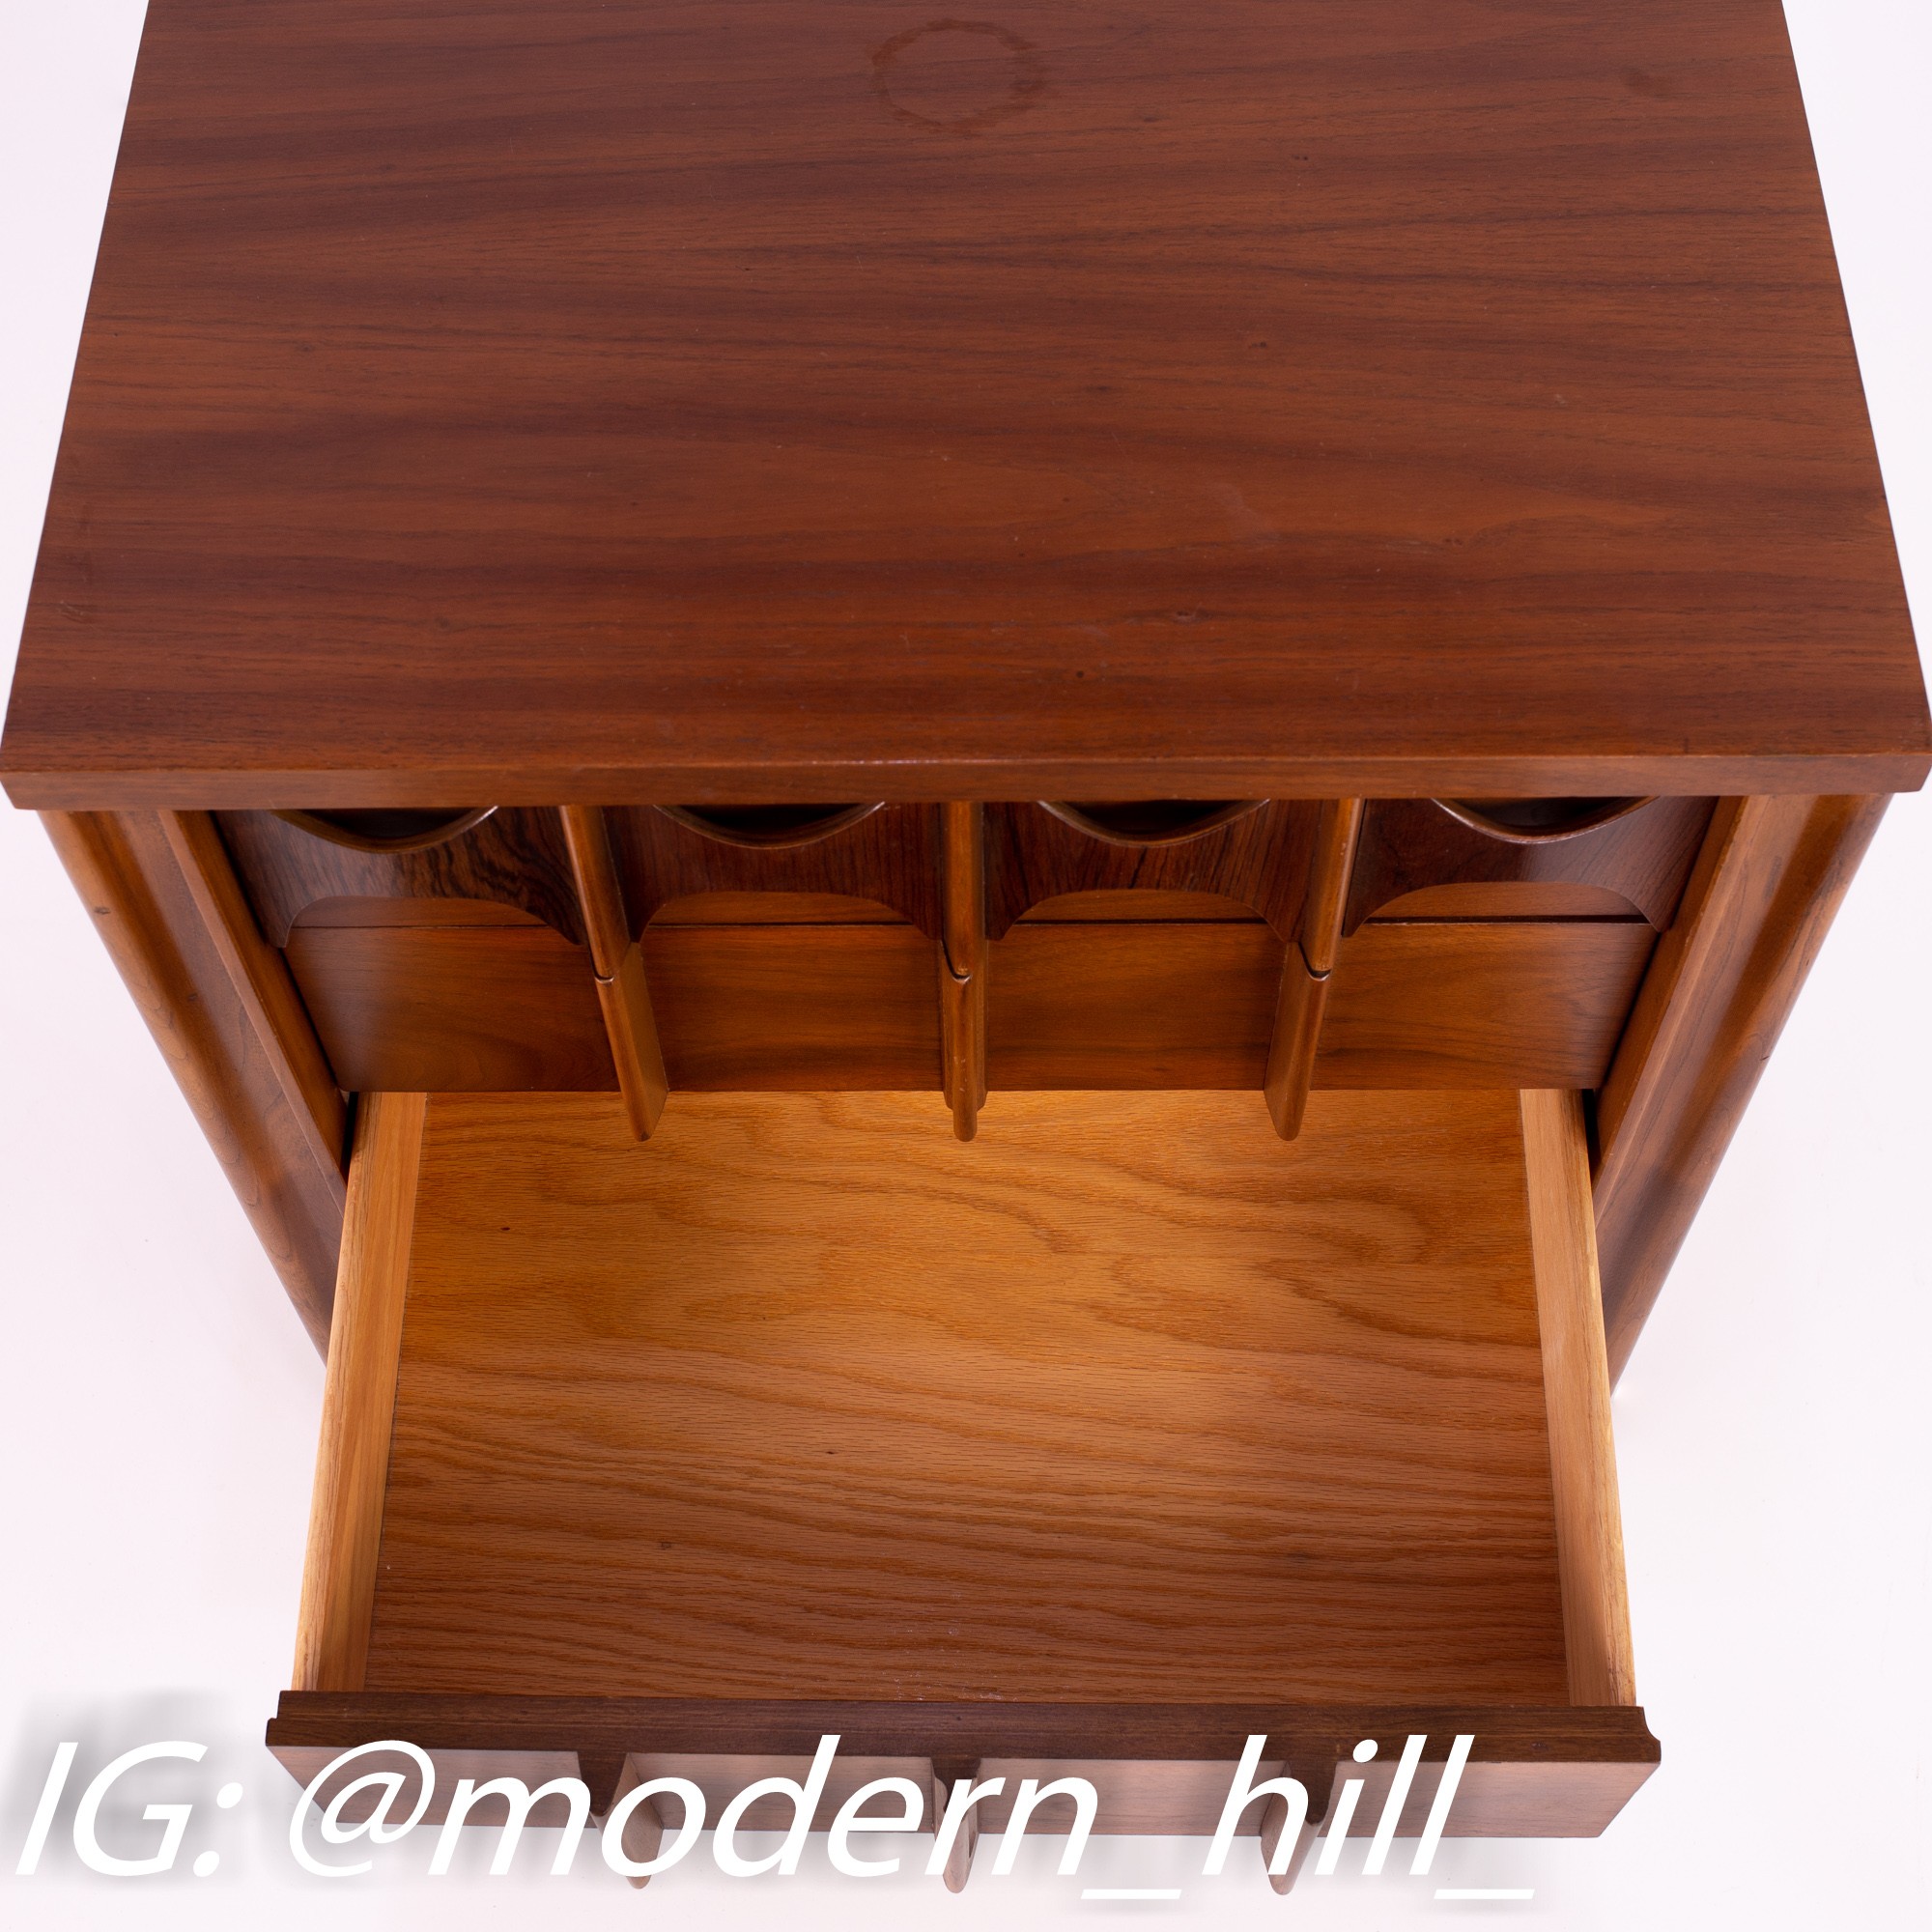 Kent Coffey Perspecta 3 Drawer Mid Century Rosewood and Walnut Nightstand Side End Table